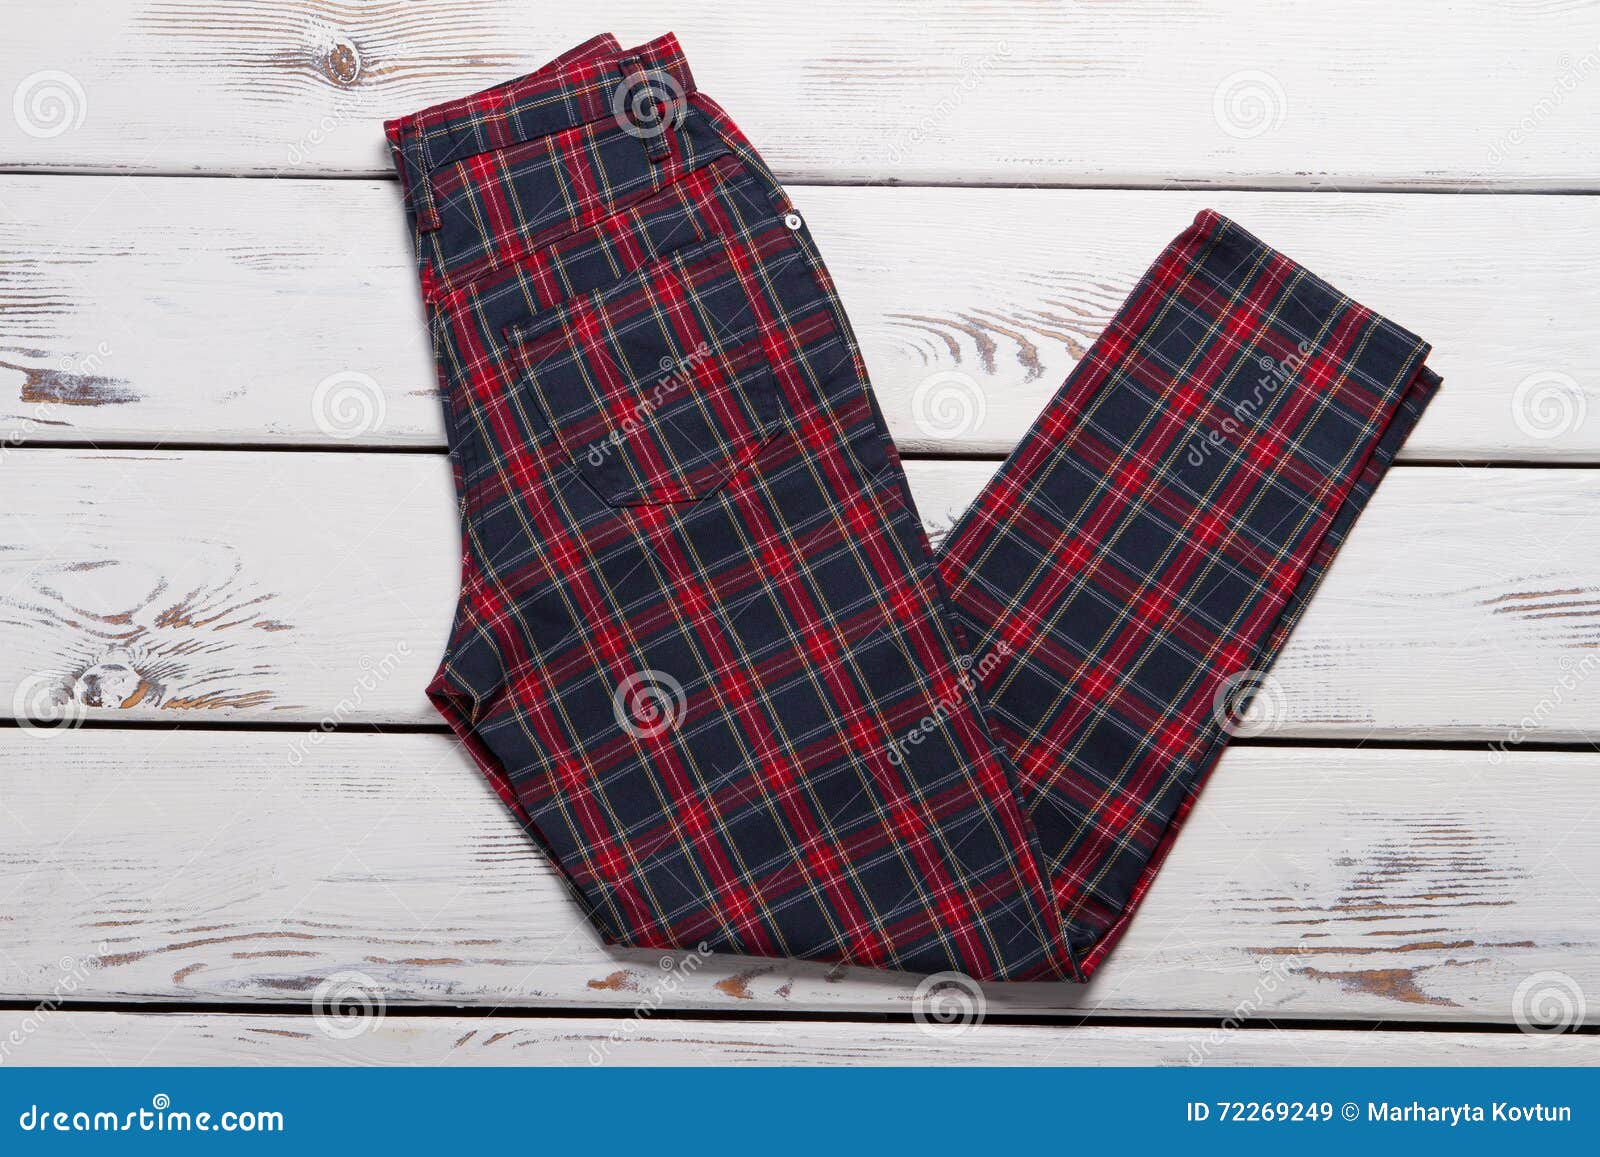 Black And Red Chekered Pants. Stock Image - Image of boutique, fabric ...